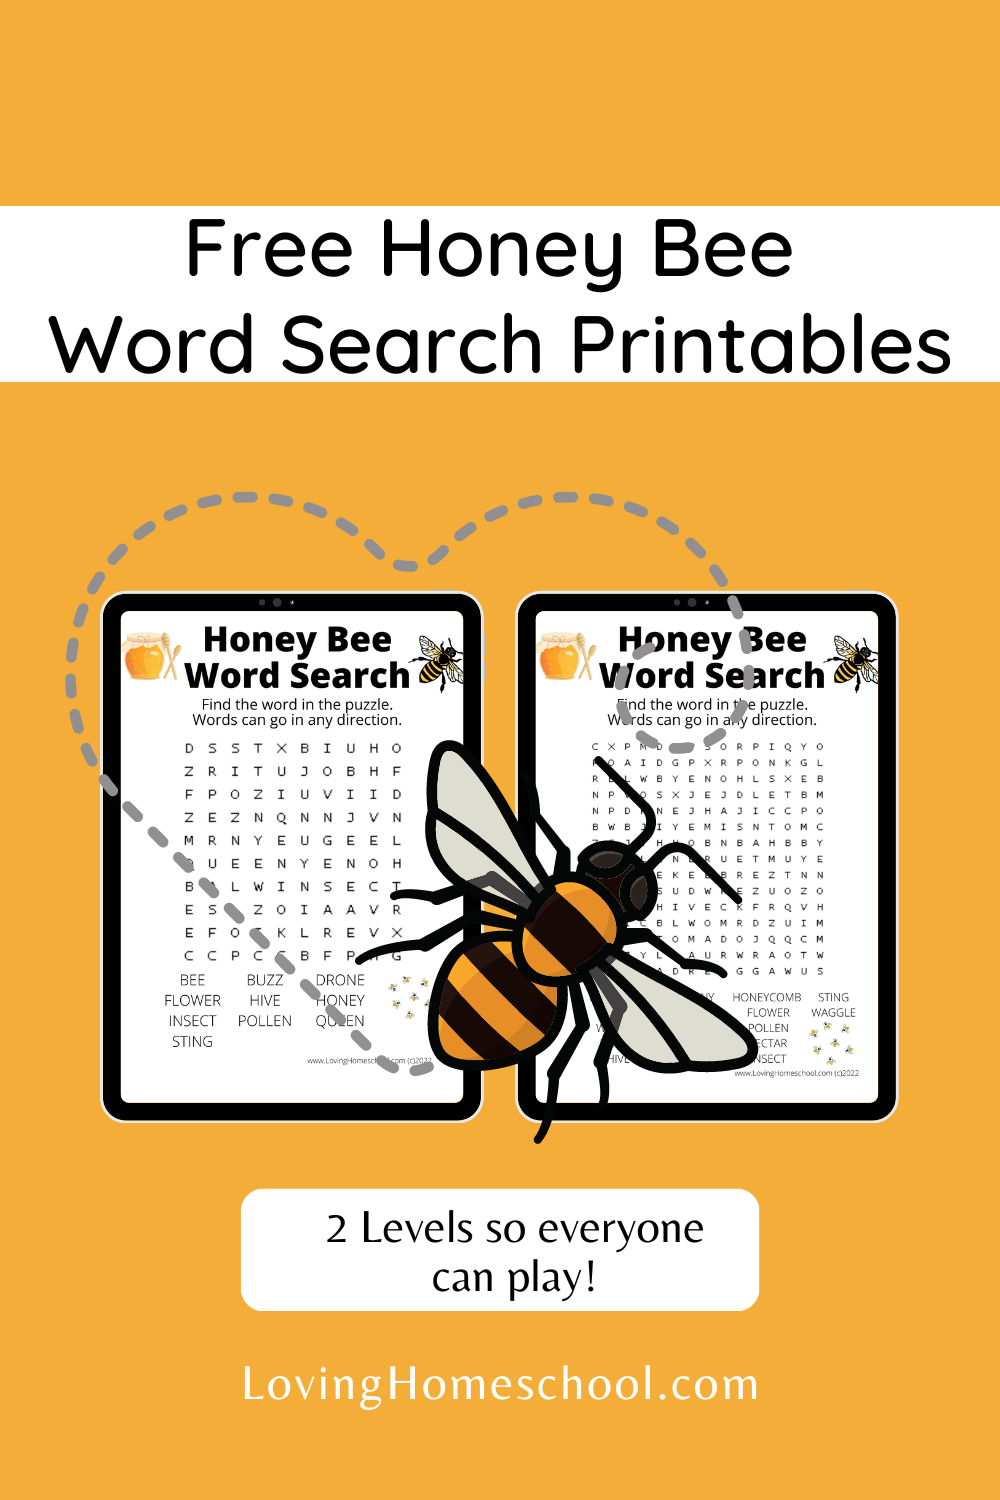 Honey Bee Word Search Printables Pinterest Pin